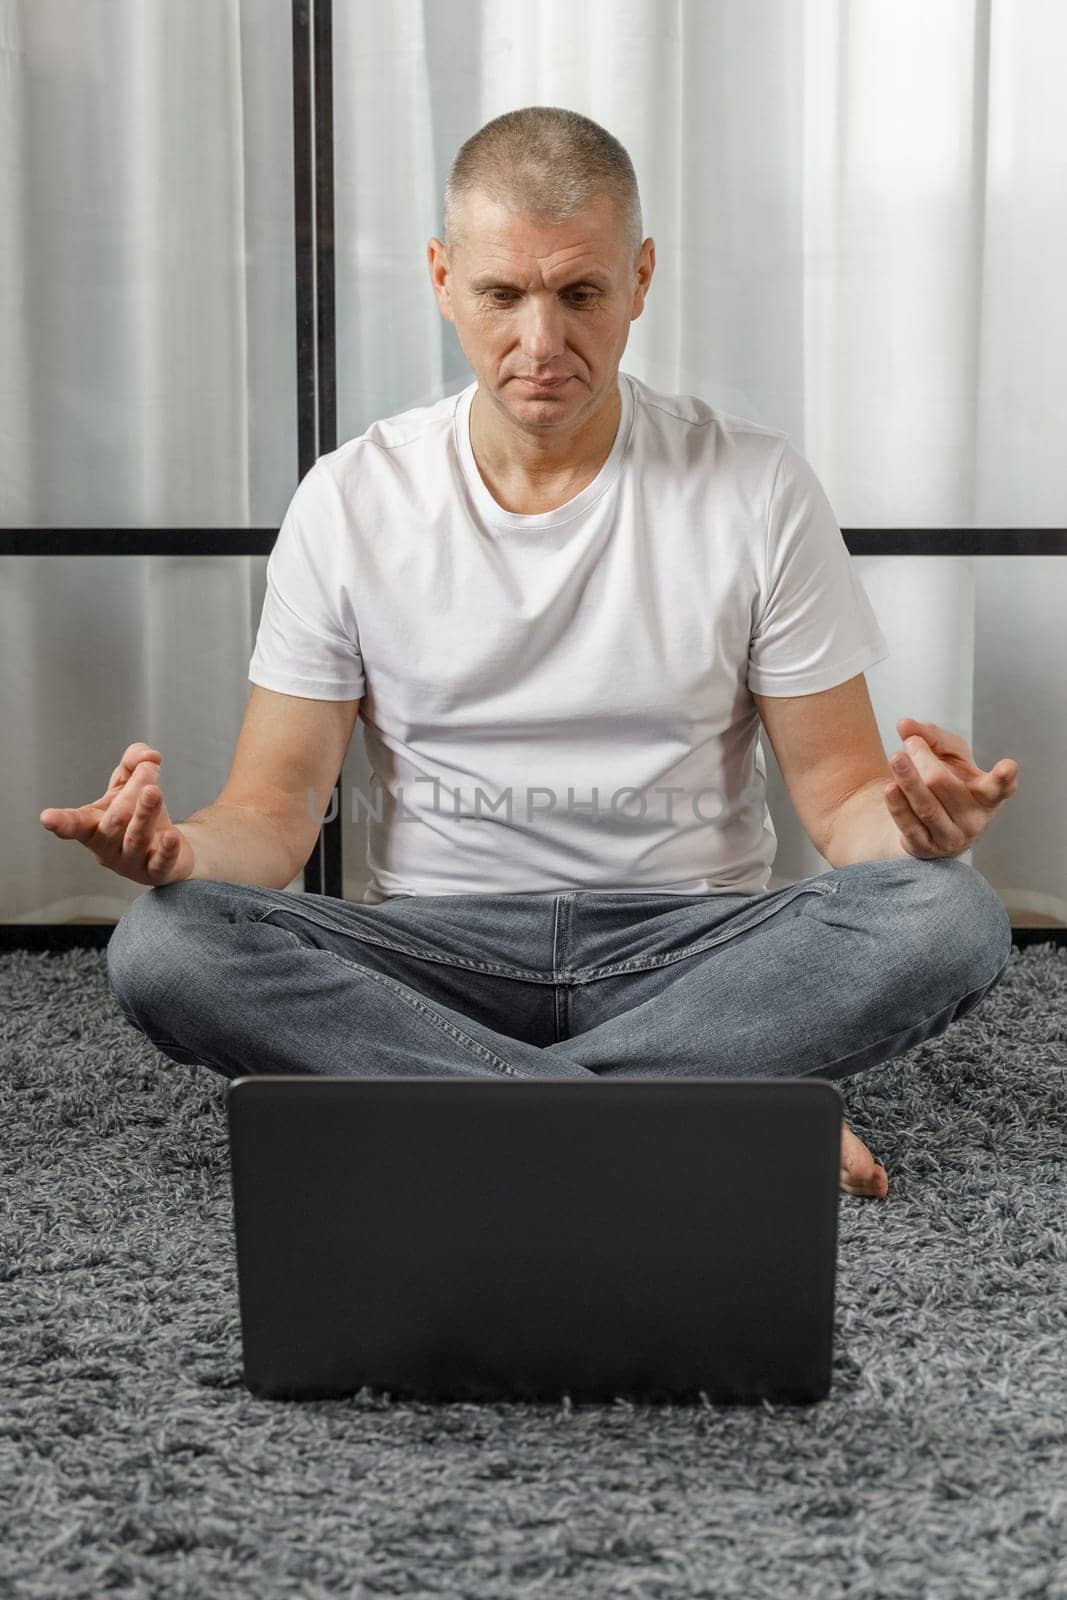 A middle-aged man conducts remote training in yoga, psychosomatics. Vertical frame. Vacation and health concept.